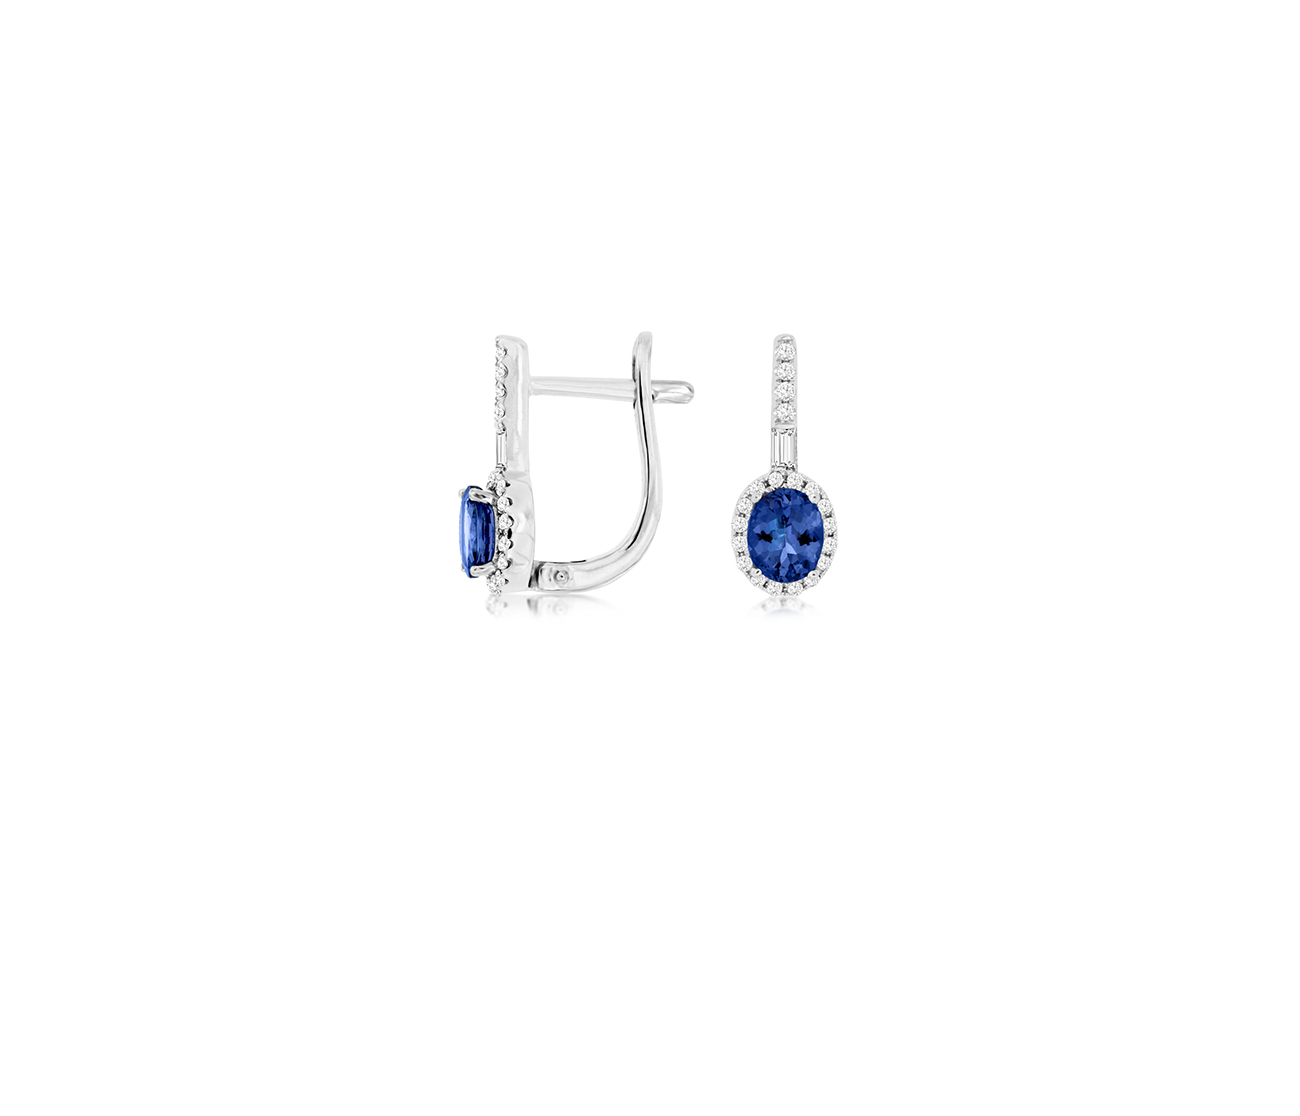 Blue Tanzanite and Diamond Earrings in 14k White Gold